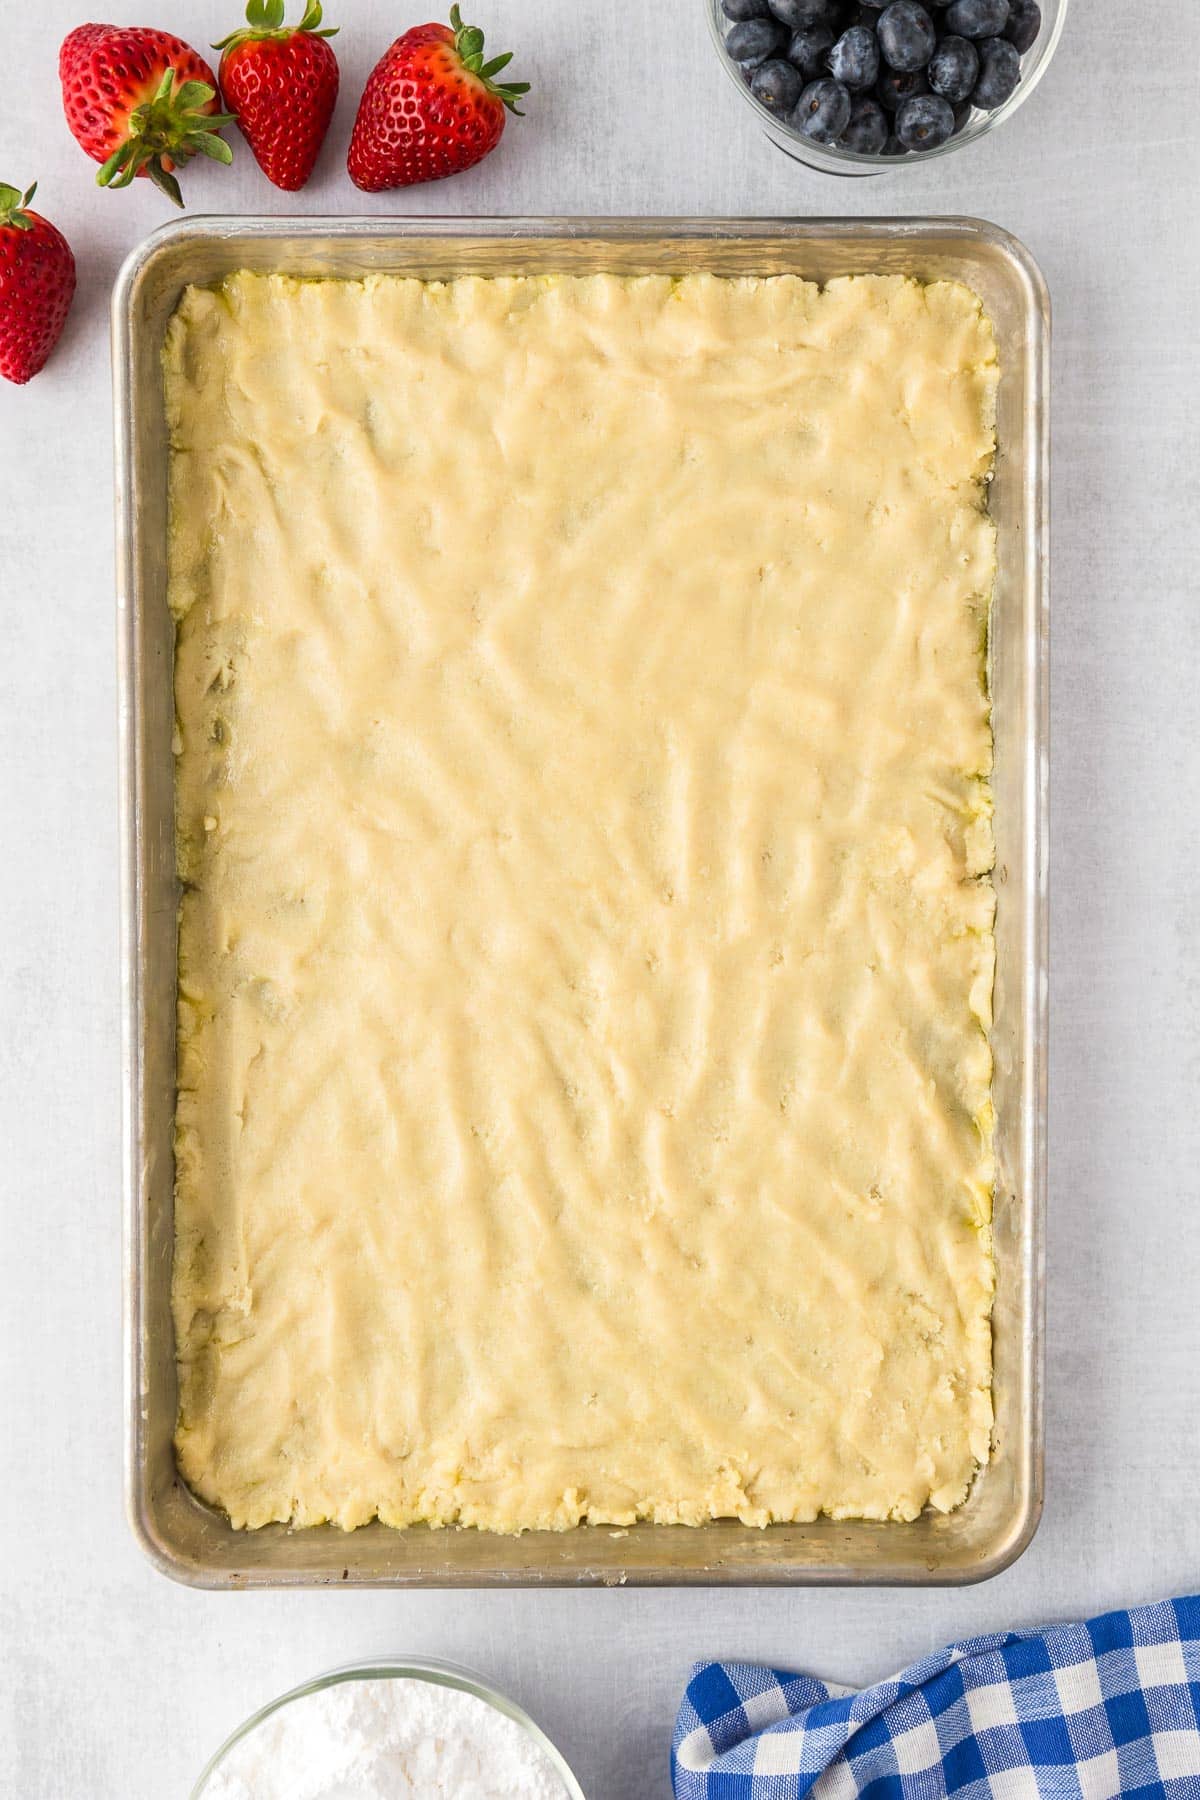 A rectangular baking tray filled with uncooked sugar cookie dough on a counter.